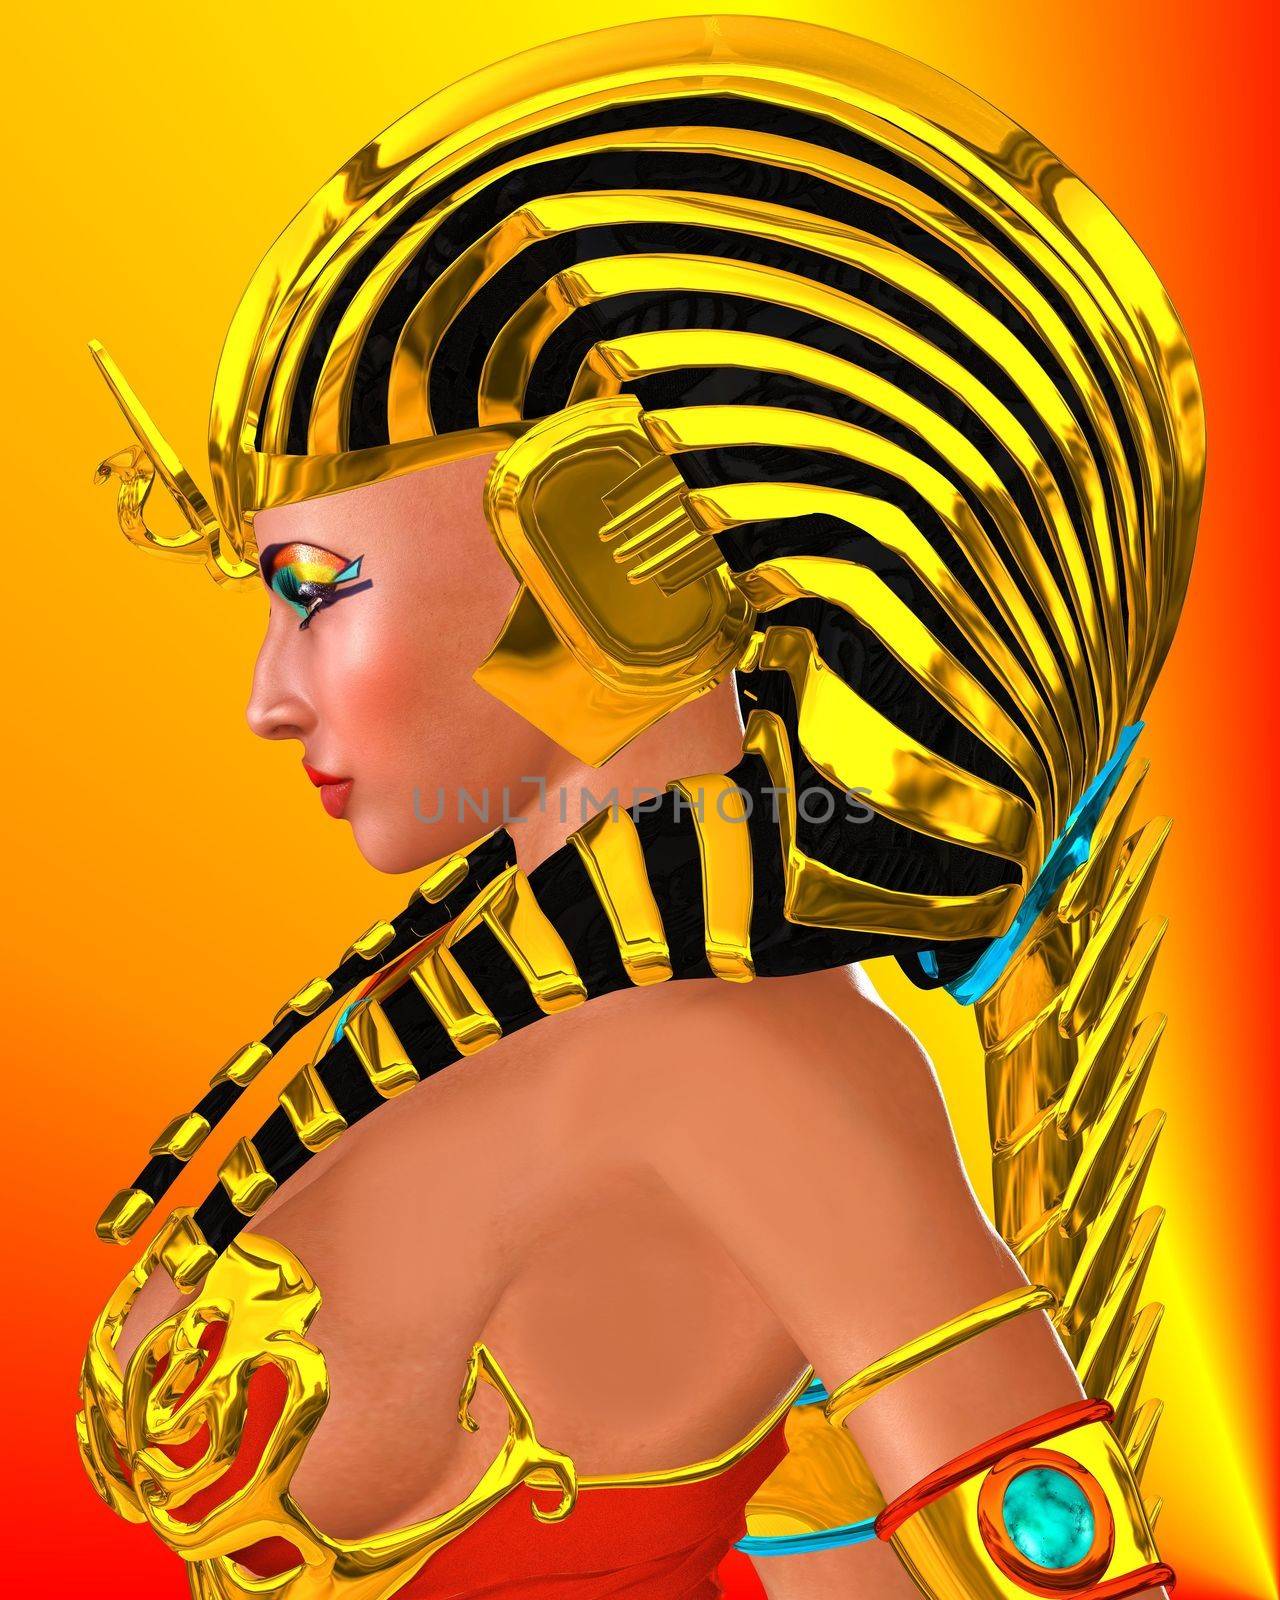 Profile of Egyptian woman Pharaoh Queen on abstract orange and red background. Artistic close up of Cleopatra or Nefertiti would be applicable or any powerful Egyptian woman.